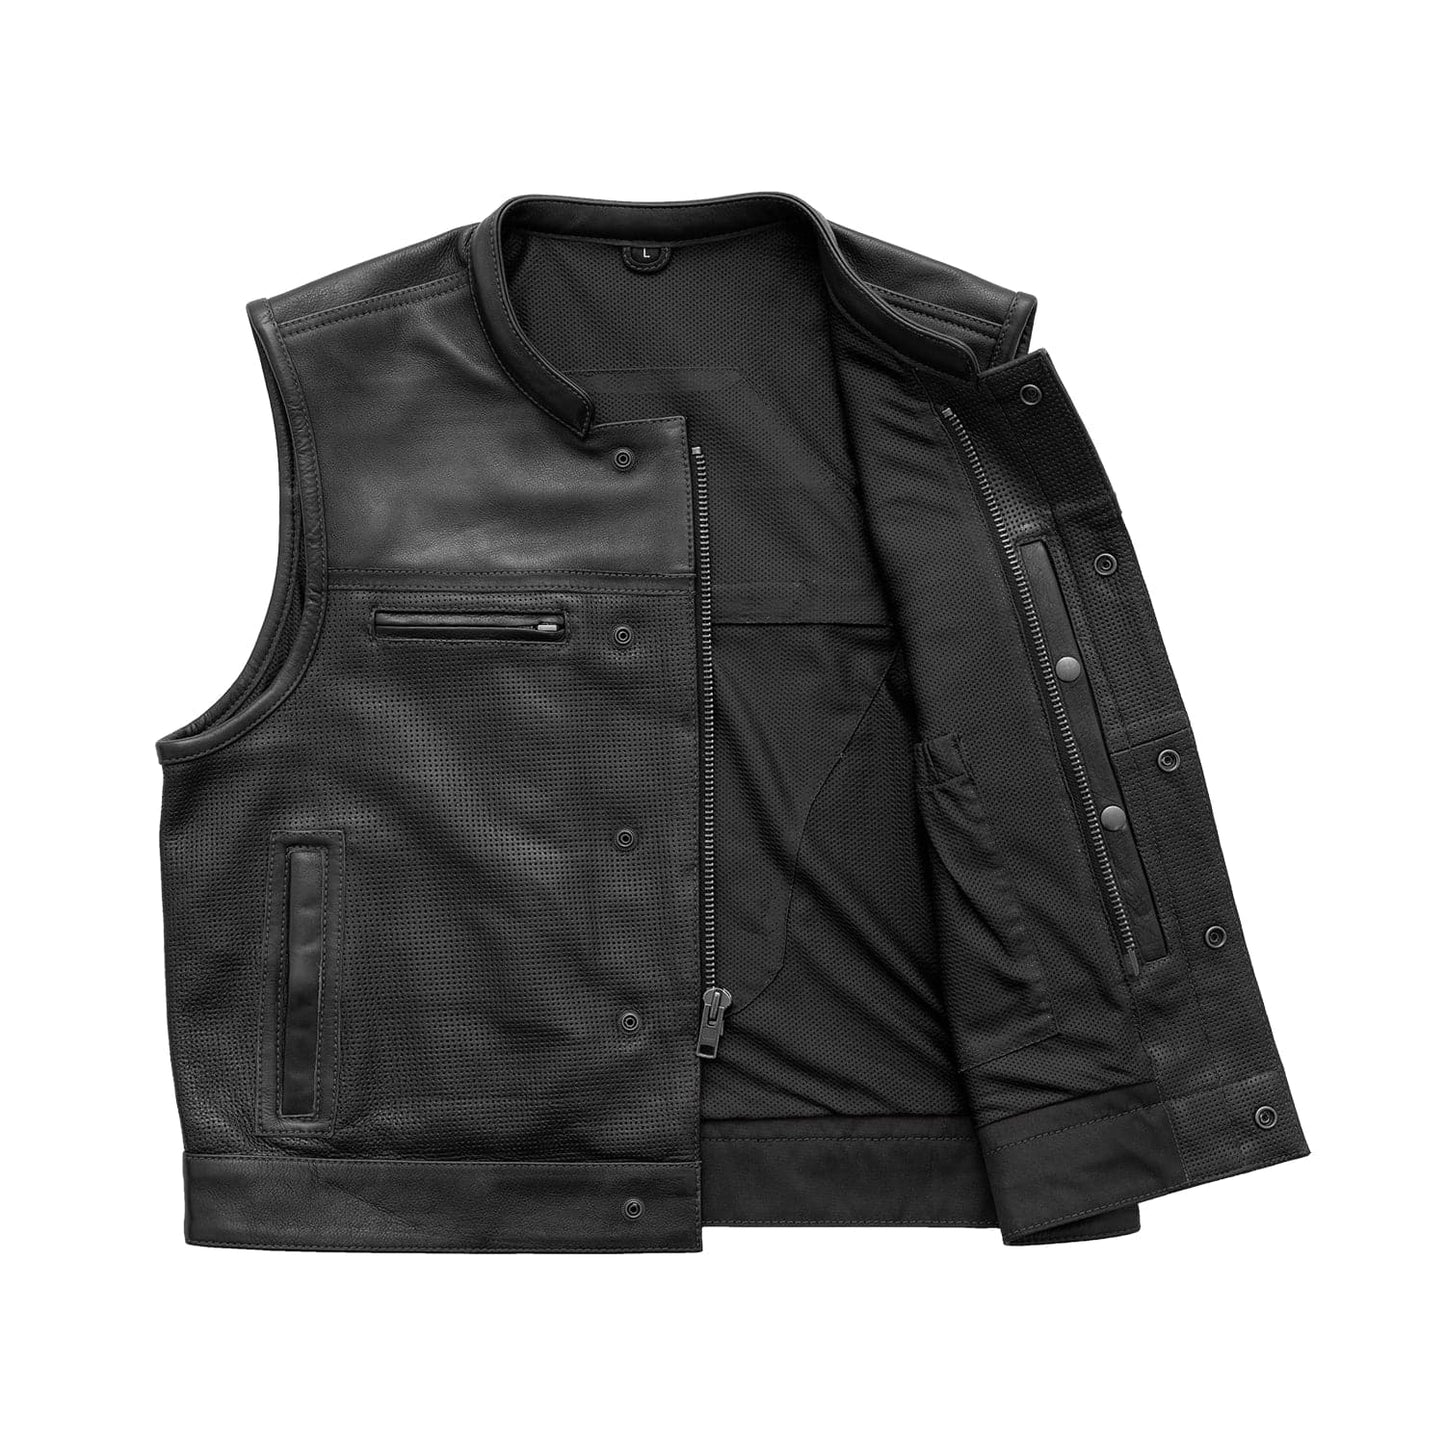 Lowrider Perforated Men's Leather Vest Men's Leather Vest First Manufacturing Company   